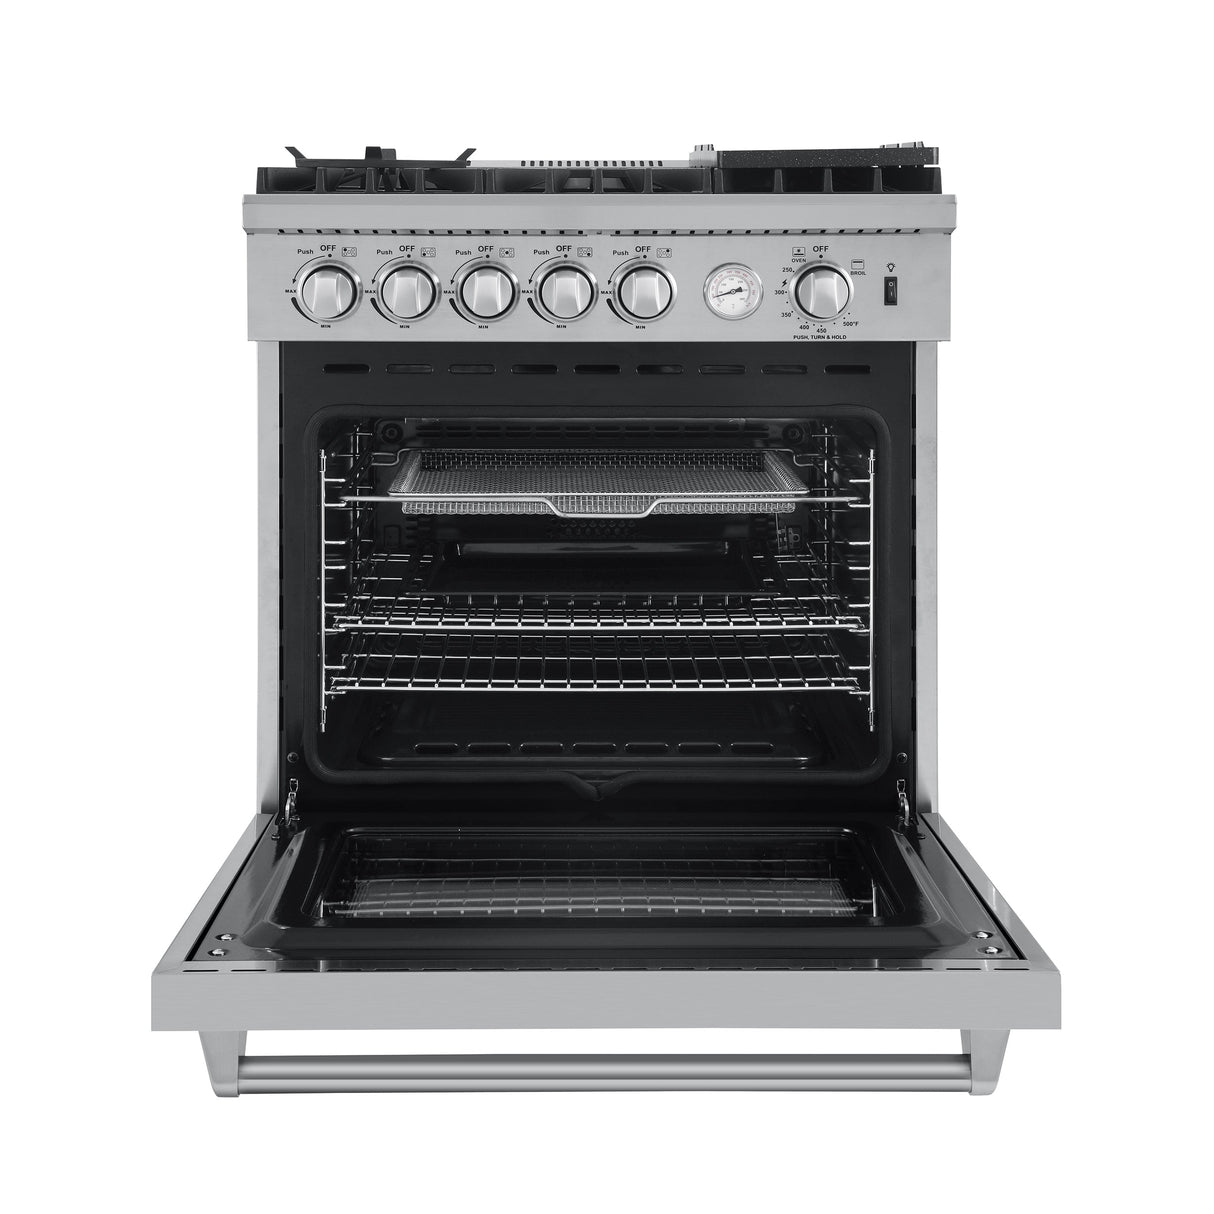 Forno 3-Piece Appliance Package - 30-Inch Gas Range with Air Fryer, French Door Refrigerator, and Dishwasher in Stainless Steel